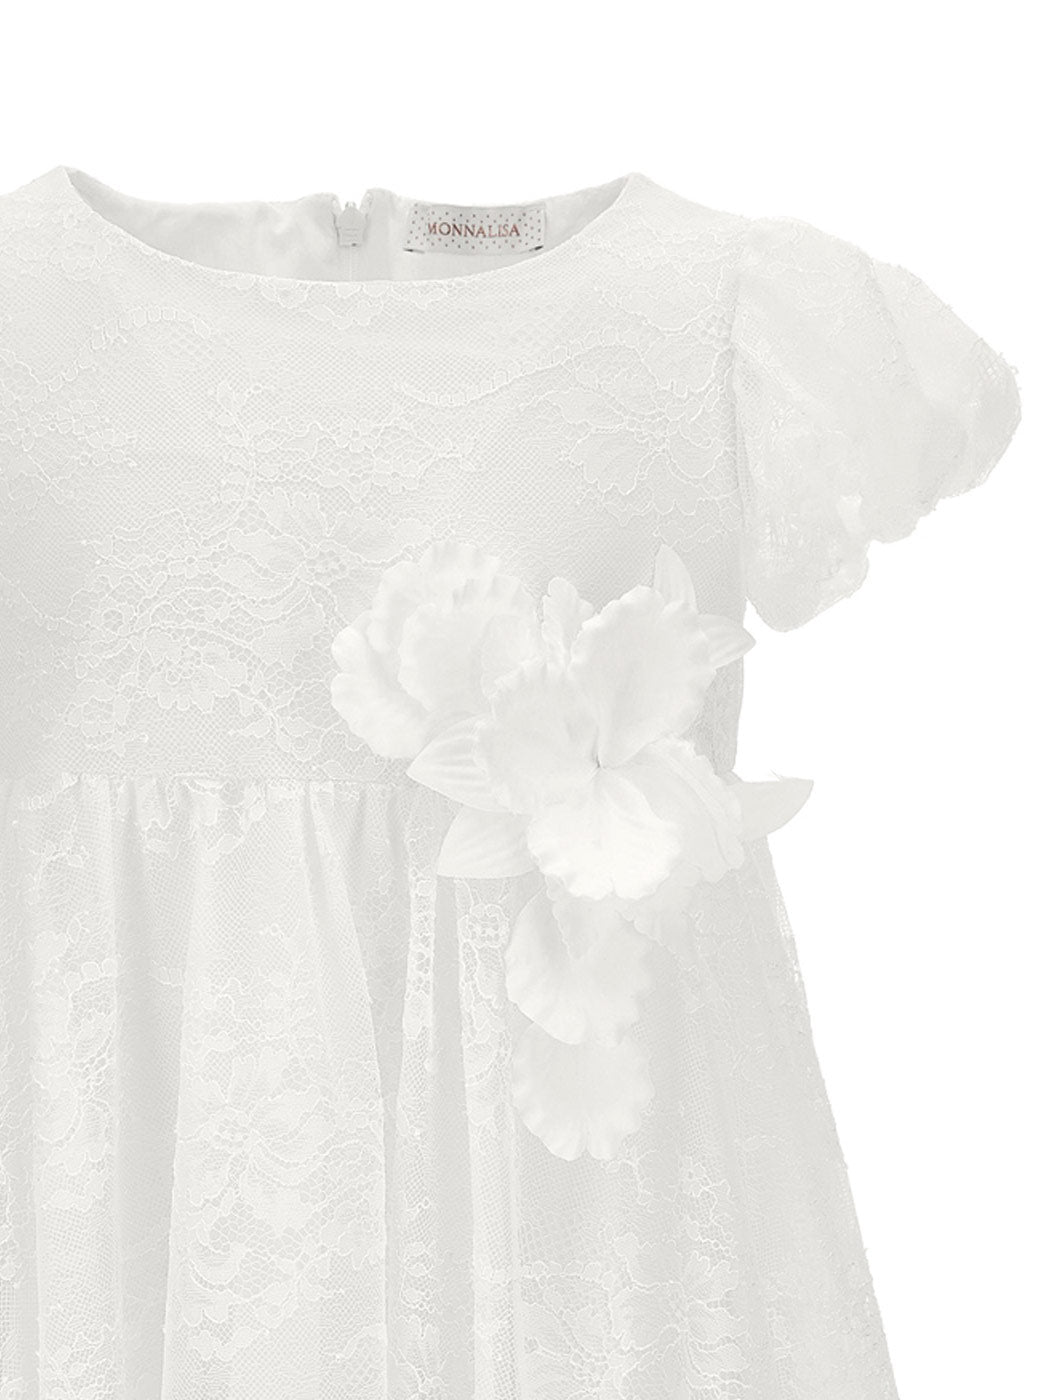 Girls floral lace dress-71C919 white